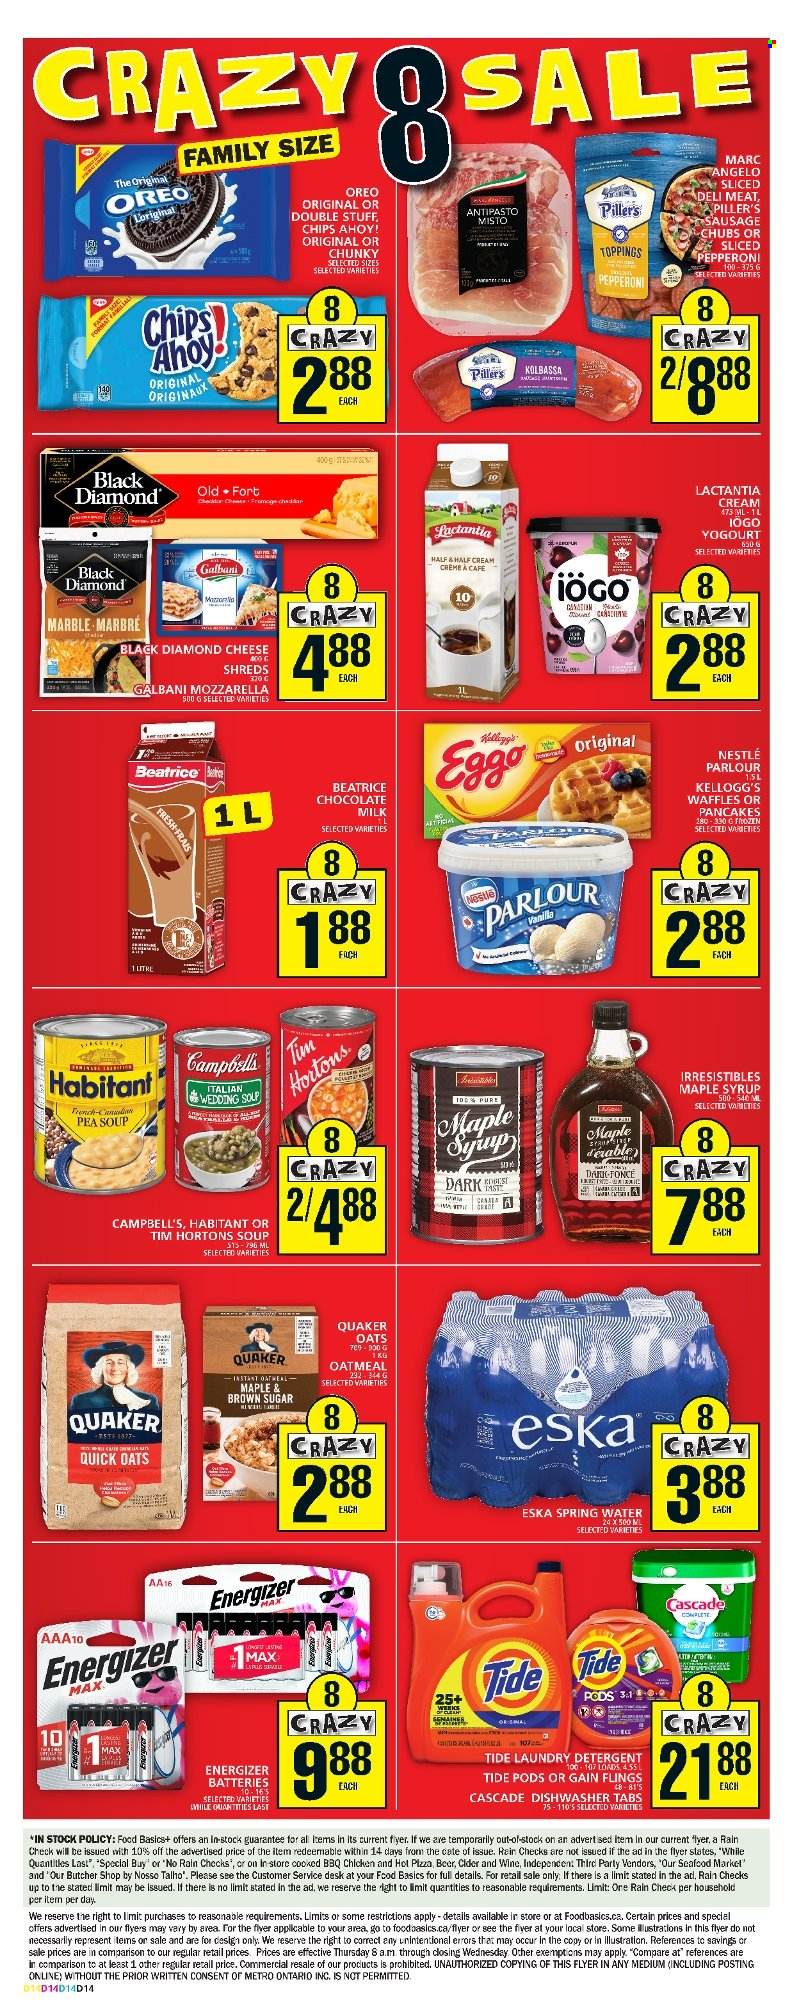 thumbnail - Food Basics Flyer - November 24, 2022 - November 30, 2022 - Sales products - waffles, seafood, Campbell's, pizza, soup, Quaker, sausage, pepperoni, Galbani, milk, chocolate, Kellogg's, Chips Ahoy!, oatmeal, oats, topping, Quick Oats, maple syrup, syrup, spring water, wine, cider, beer, Half and half, Gain, Tide, laundry detergent, Cascade, battery, detergent, Energizer, Nestlé, Oreo. Page 2.